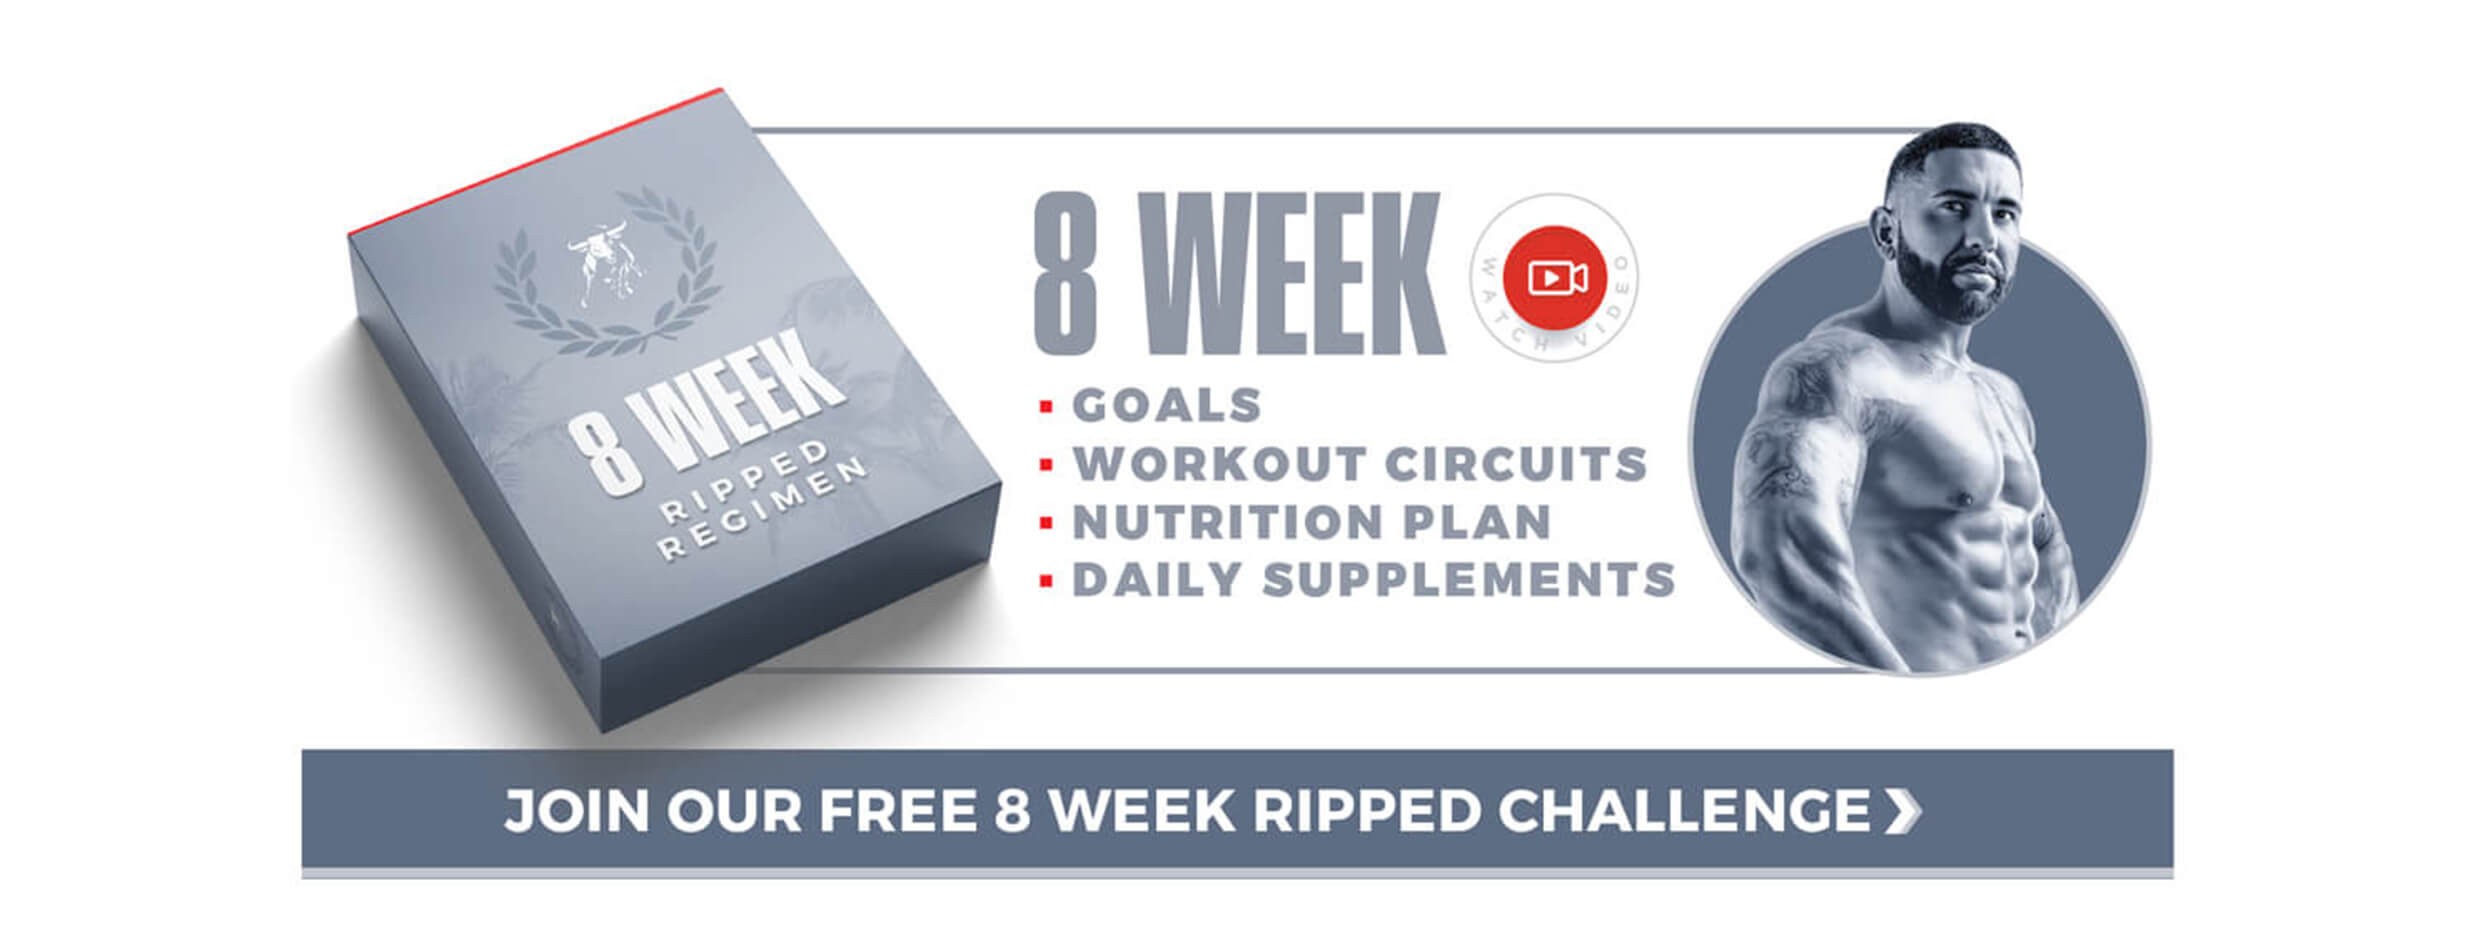 8 week ripped challenge